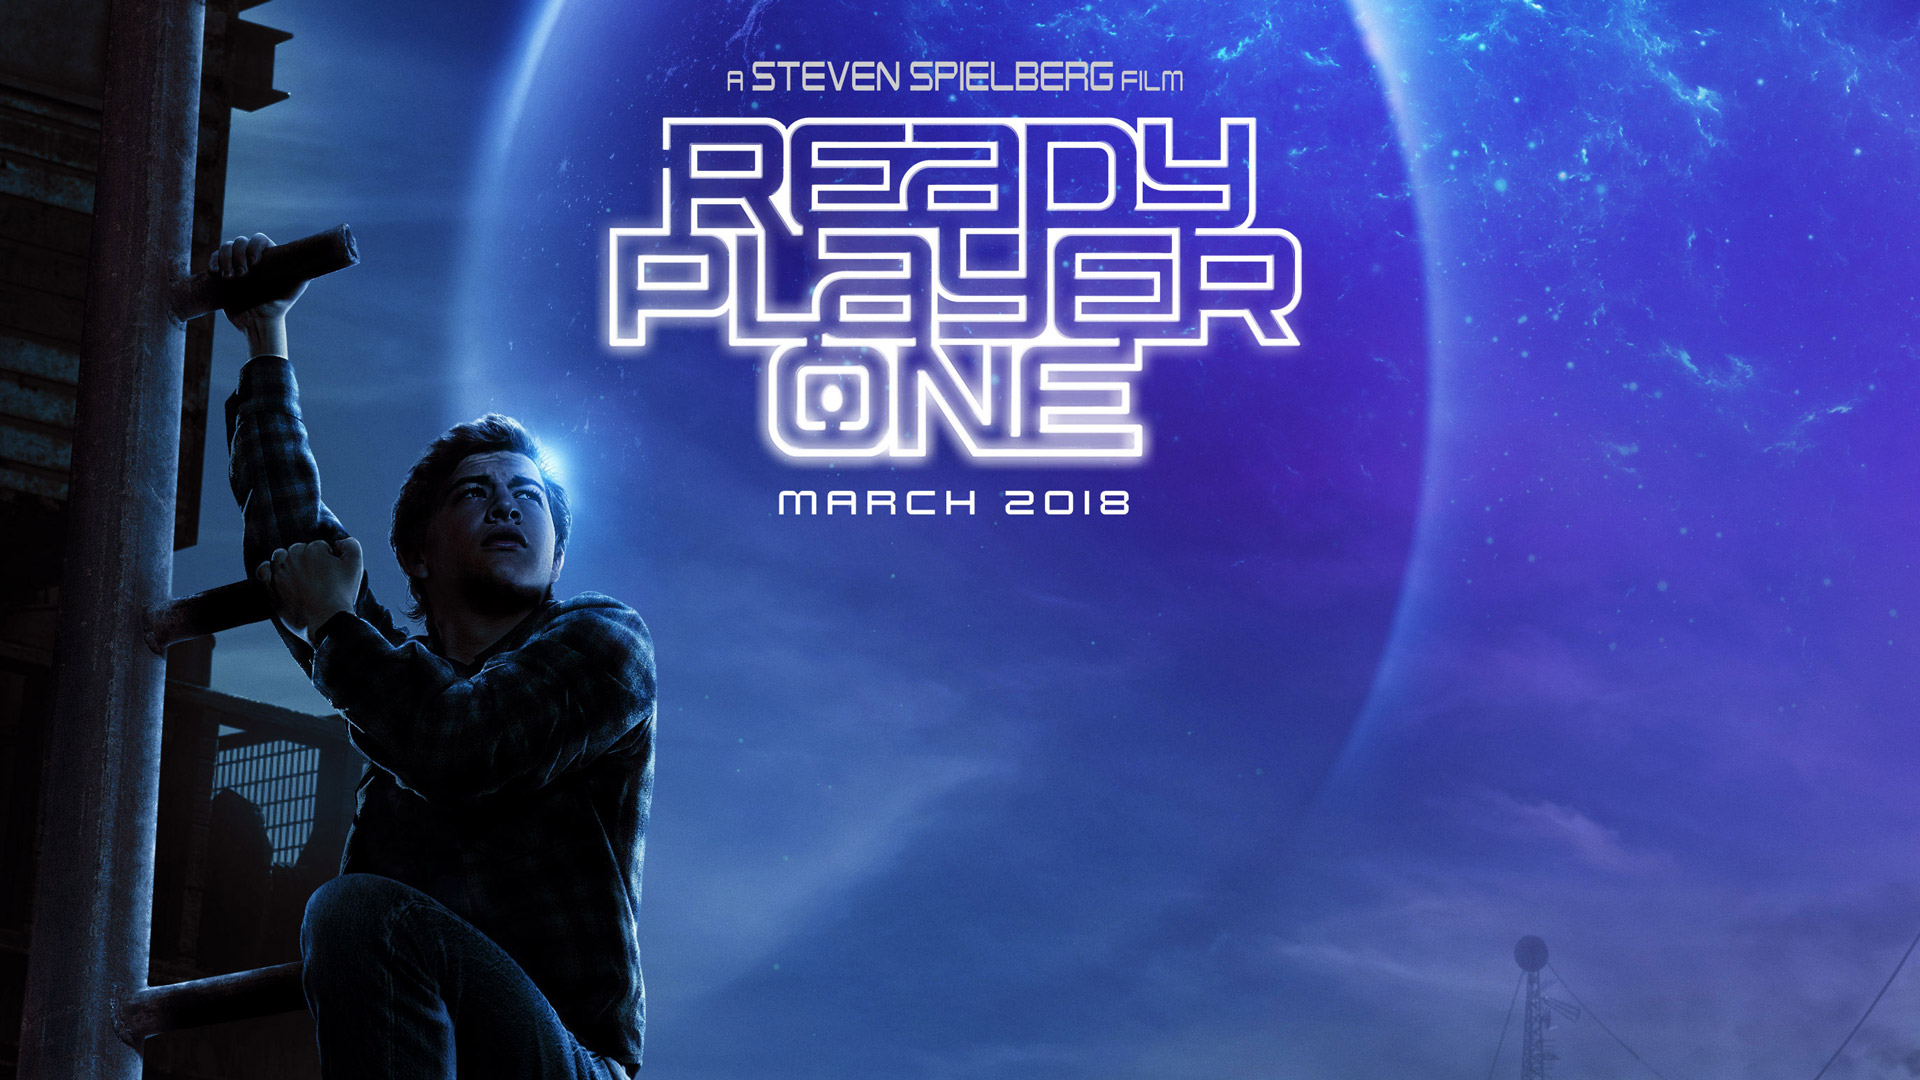 The trailer for Spielberg's Ready Player One is here